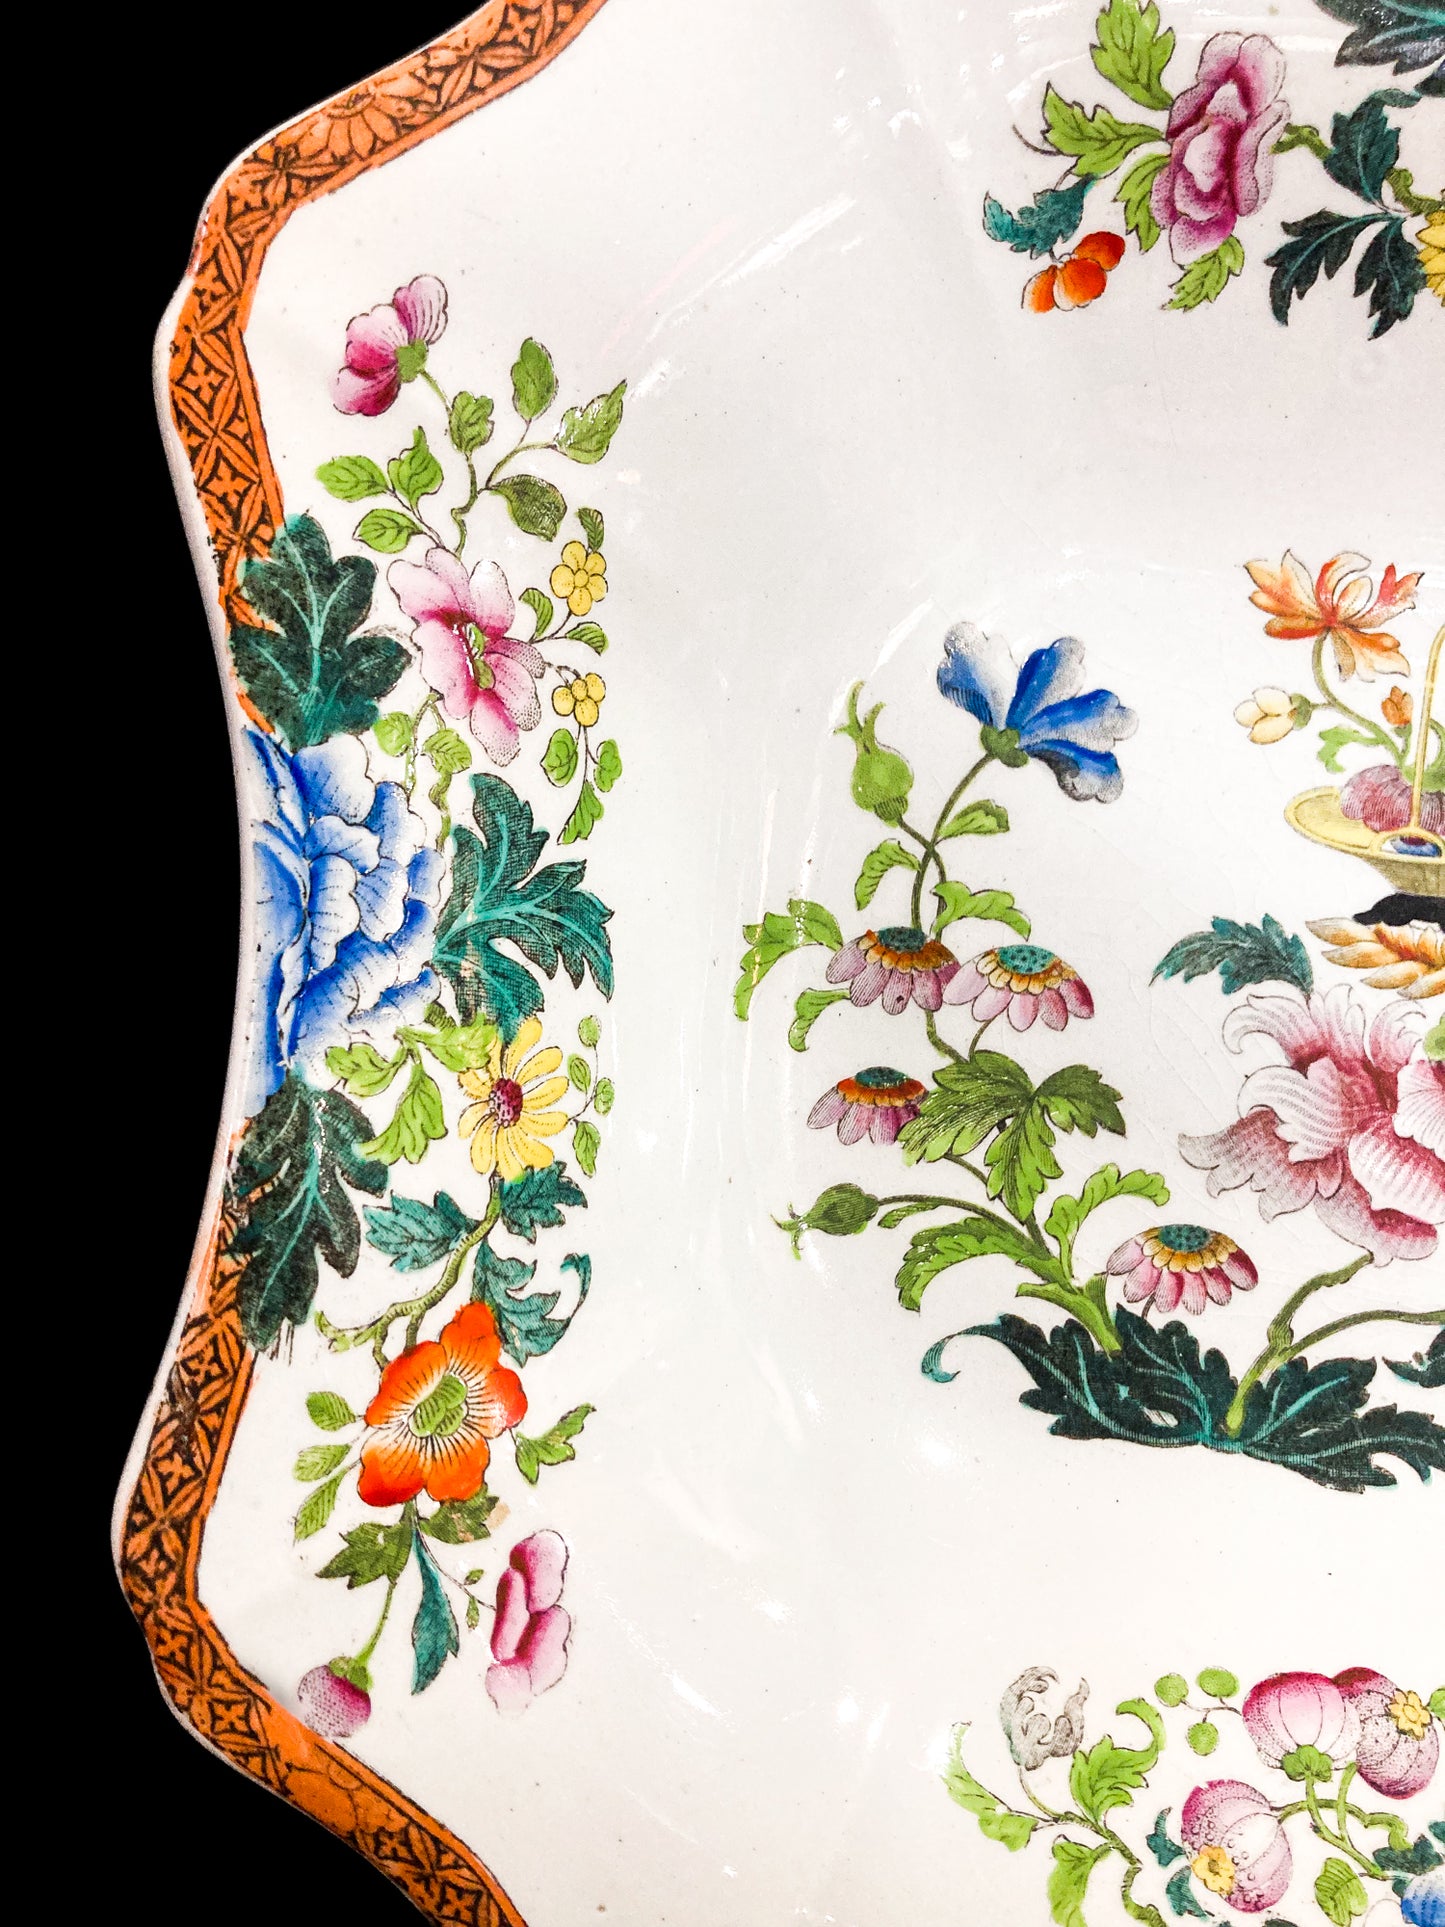 Antique 1850s Wedgwood Enameled Multicolor Floral Footed Compote Dish Close Up Edge